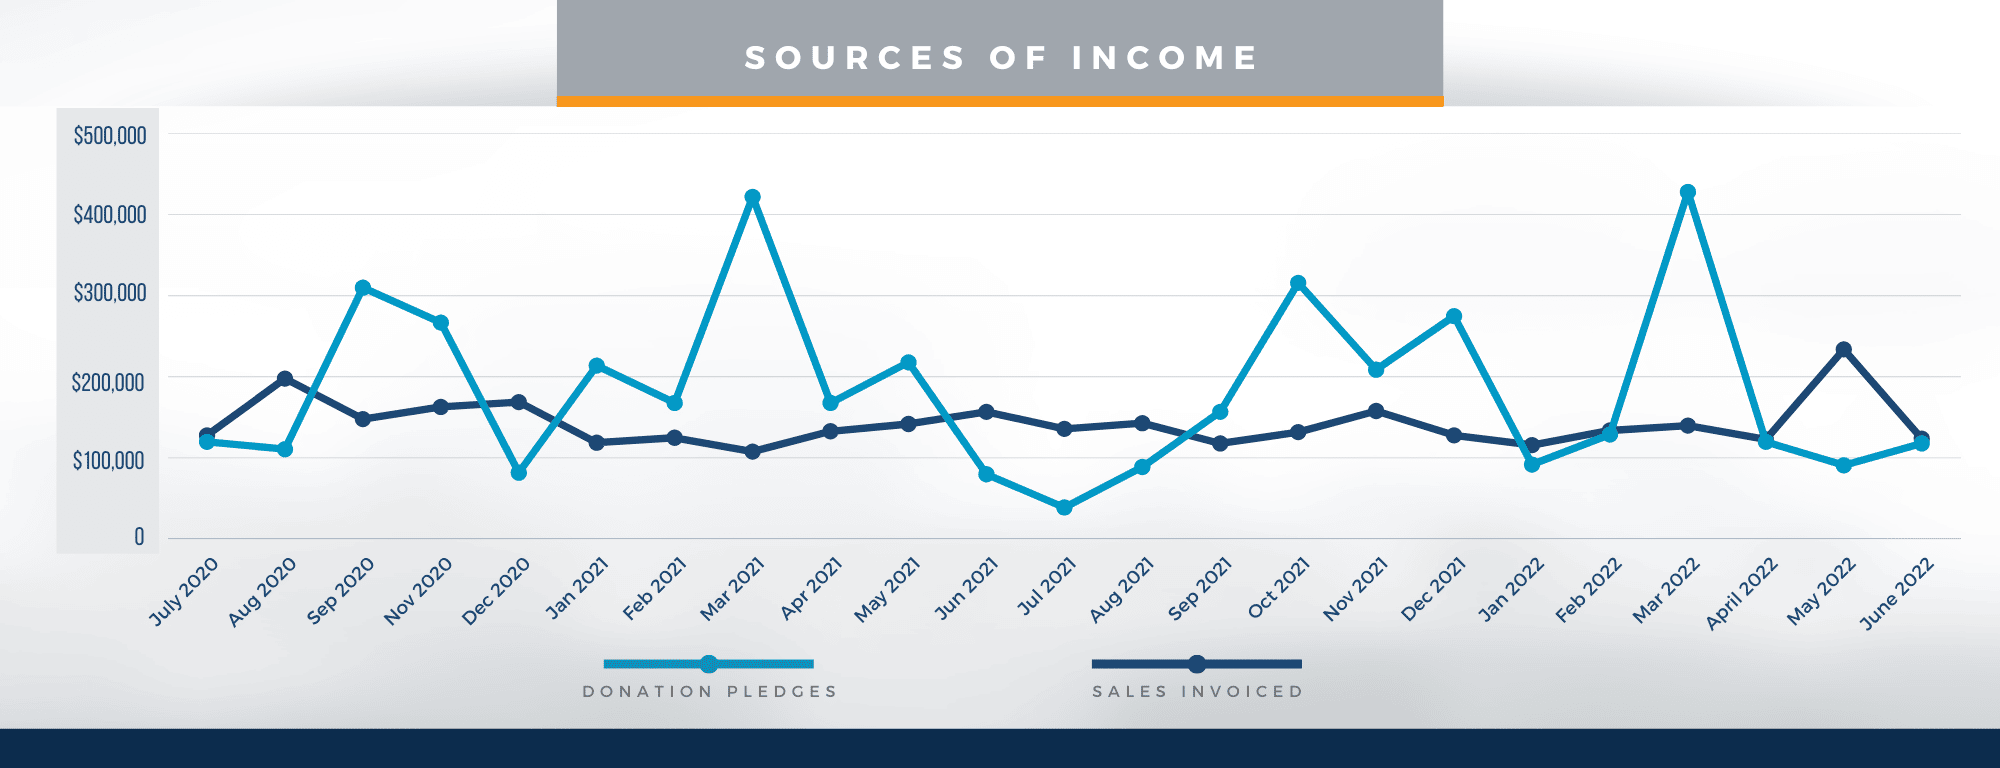 Sources of Income - September